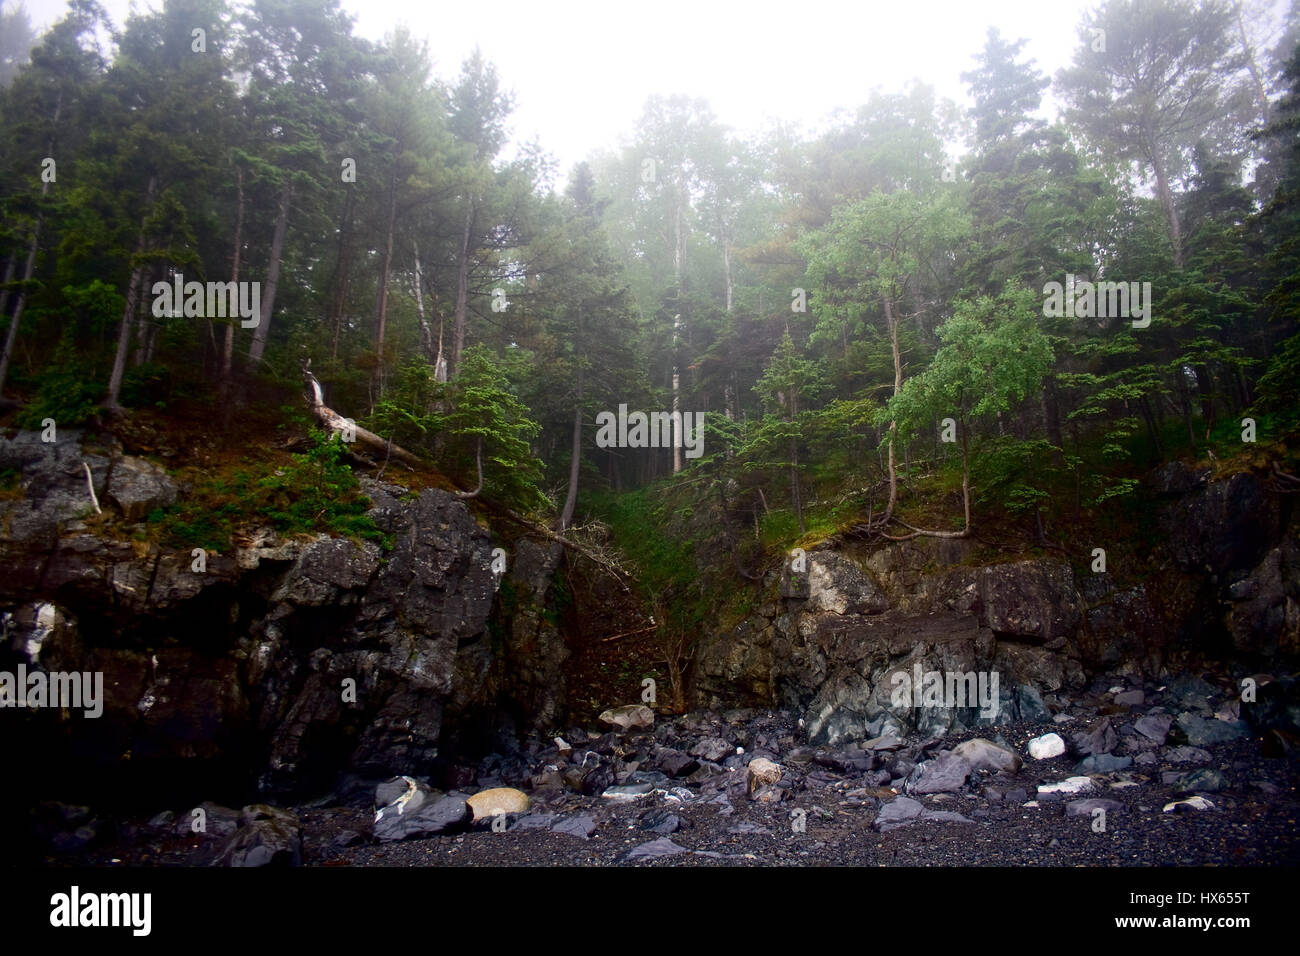 Craggy rocky shoreline of Maine with trees and fog. Stock Photo